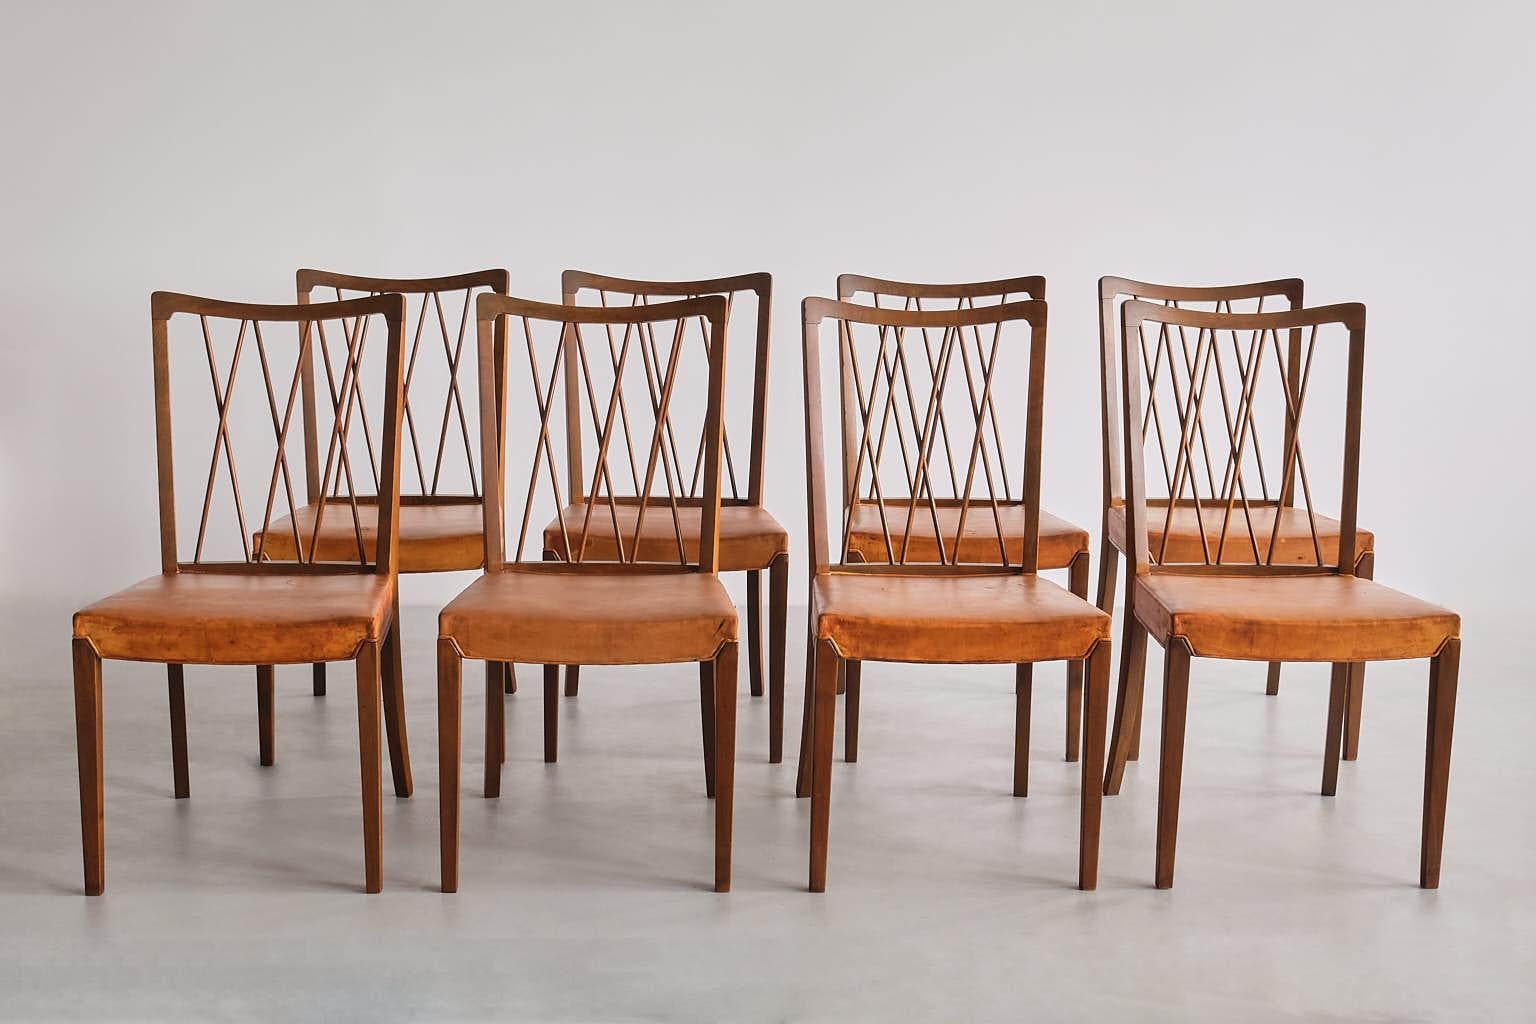 This very rare set of eight dining chairs was designed by Frode Holm and produced by Illum Bolighus in Denmark in the 1940s. 
The elegant design is marked by the tapered front legs, the slightly curved back legs and the distinct back rest. The